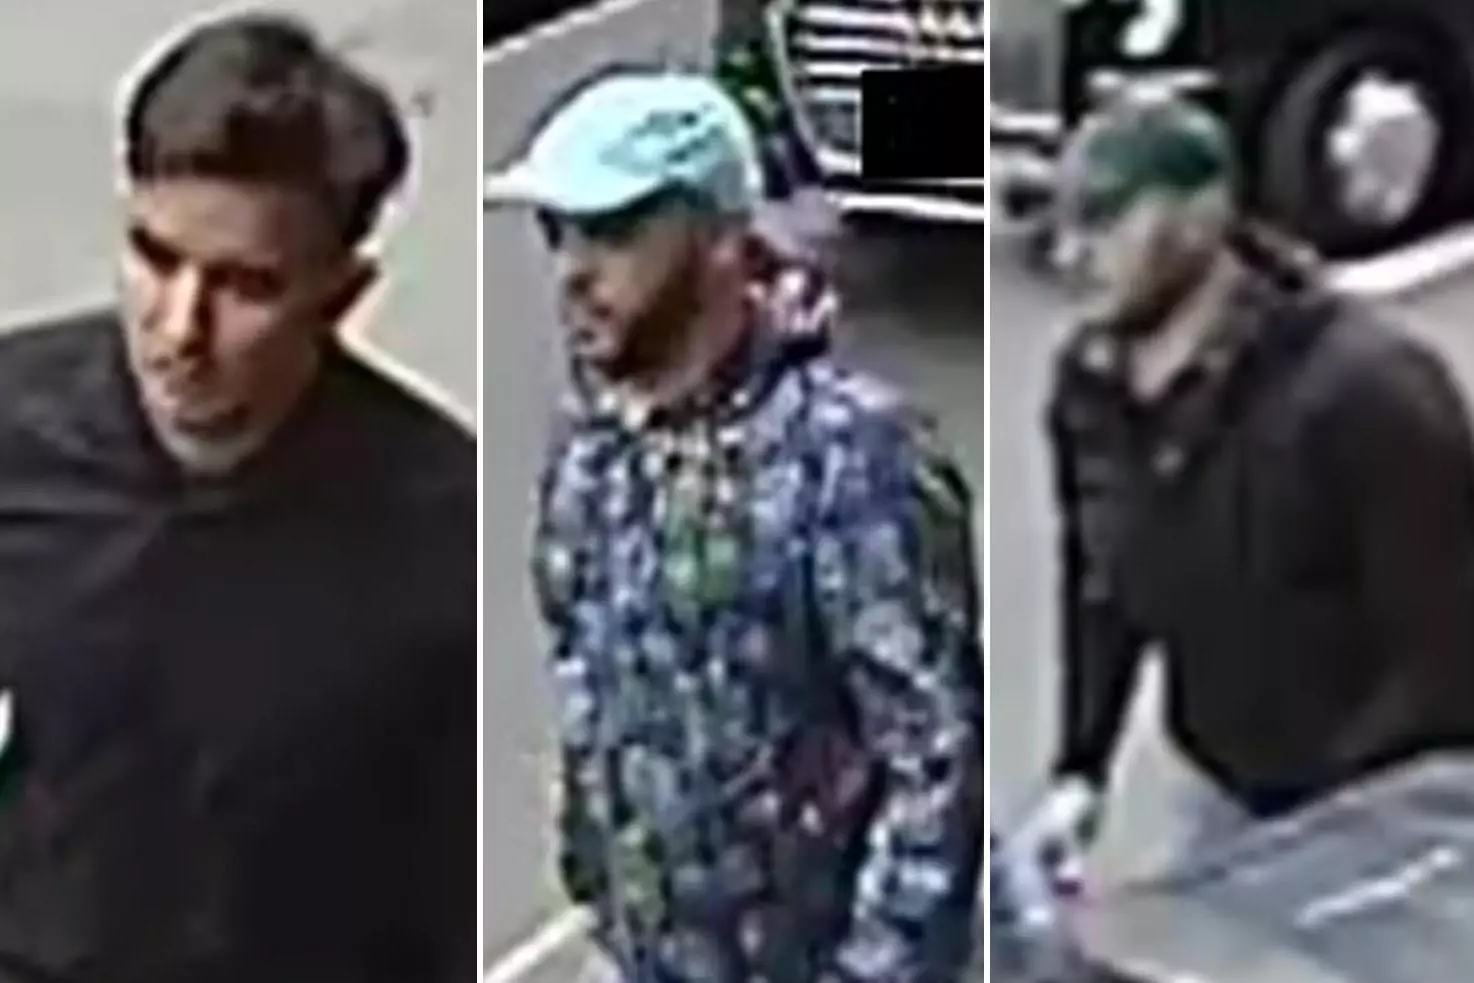 Police are appealing for help identifying the three suspects.